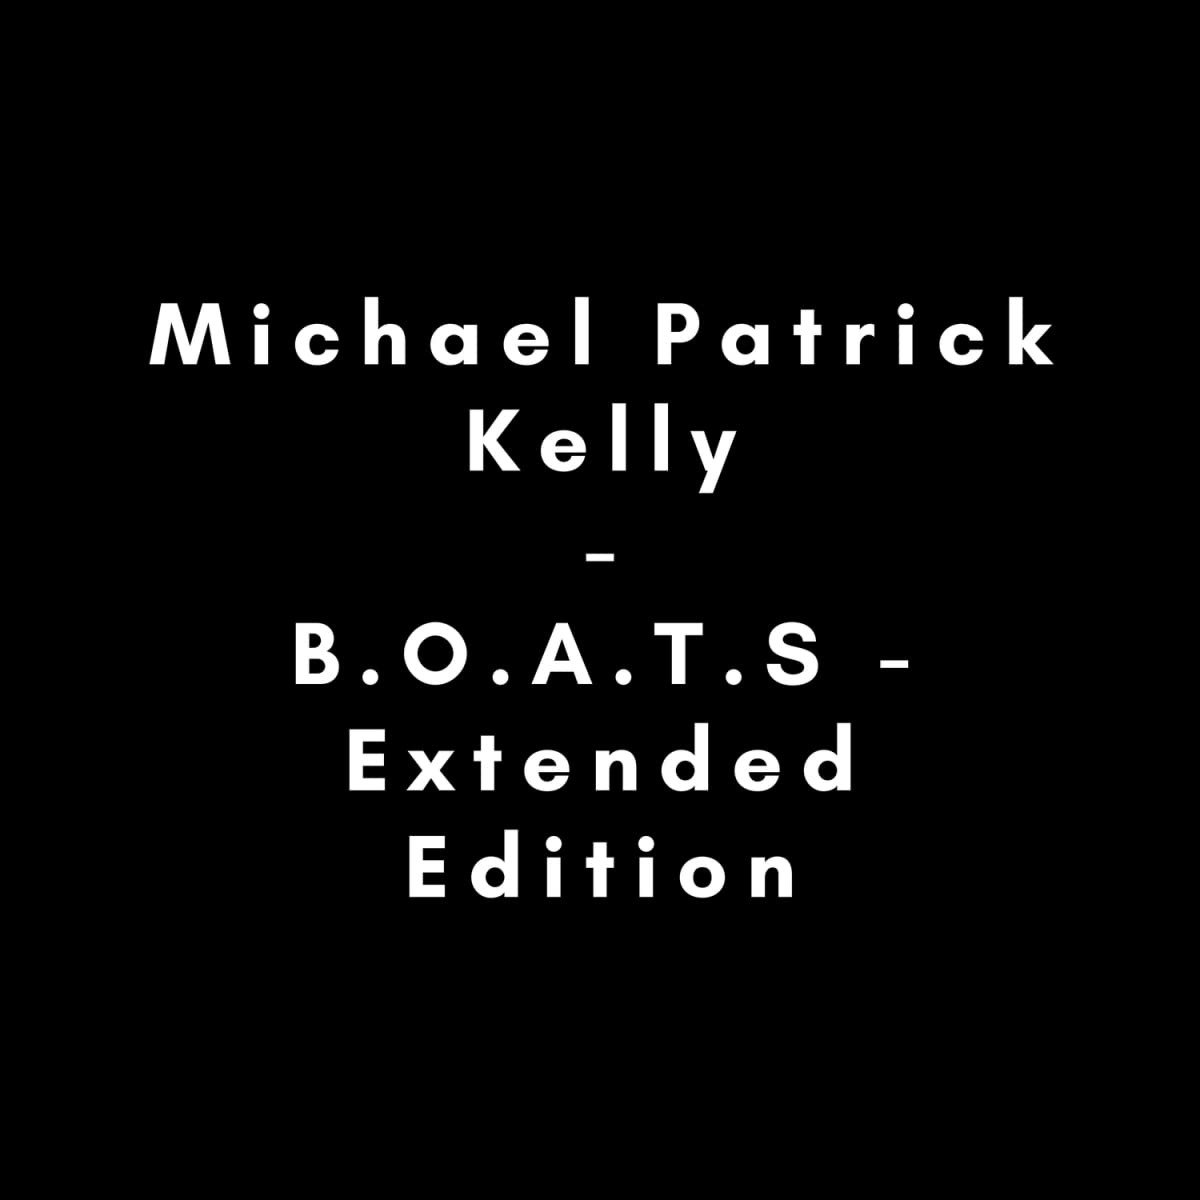 Boats - Extended Edition | Michael Patrick Kelly image1